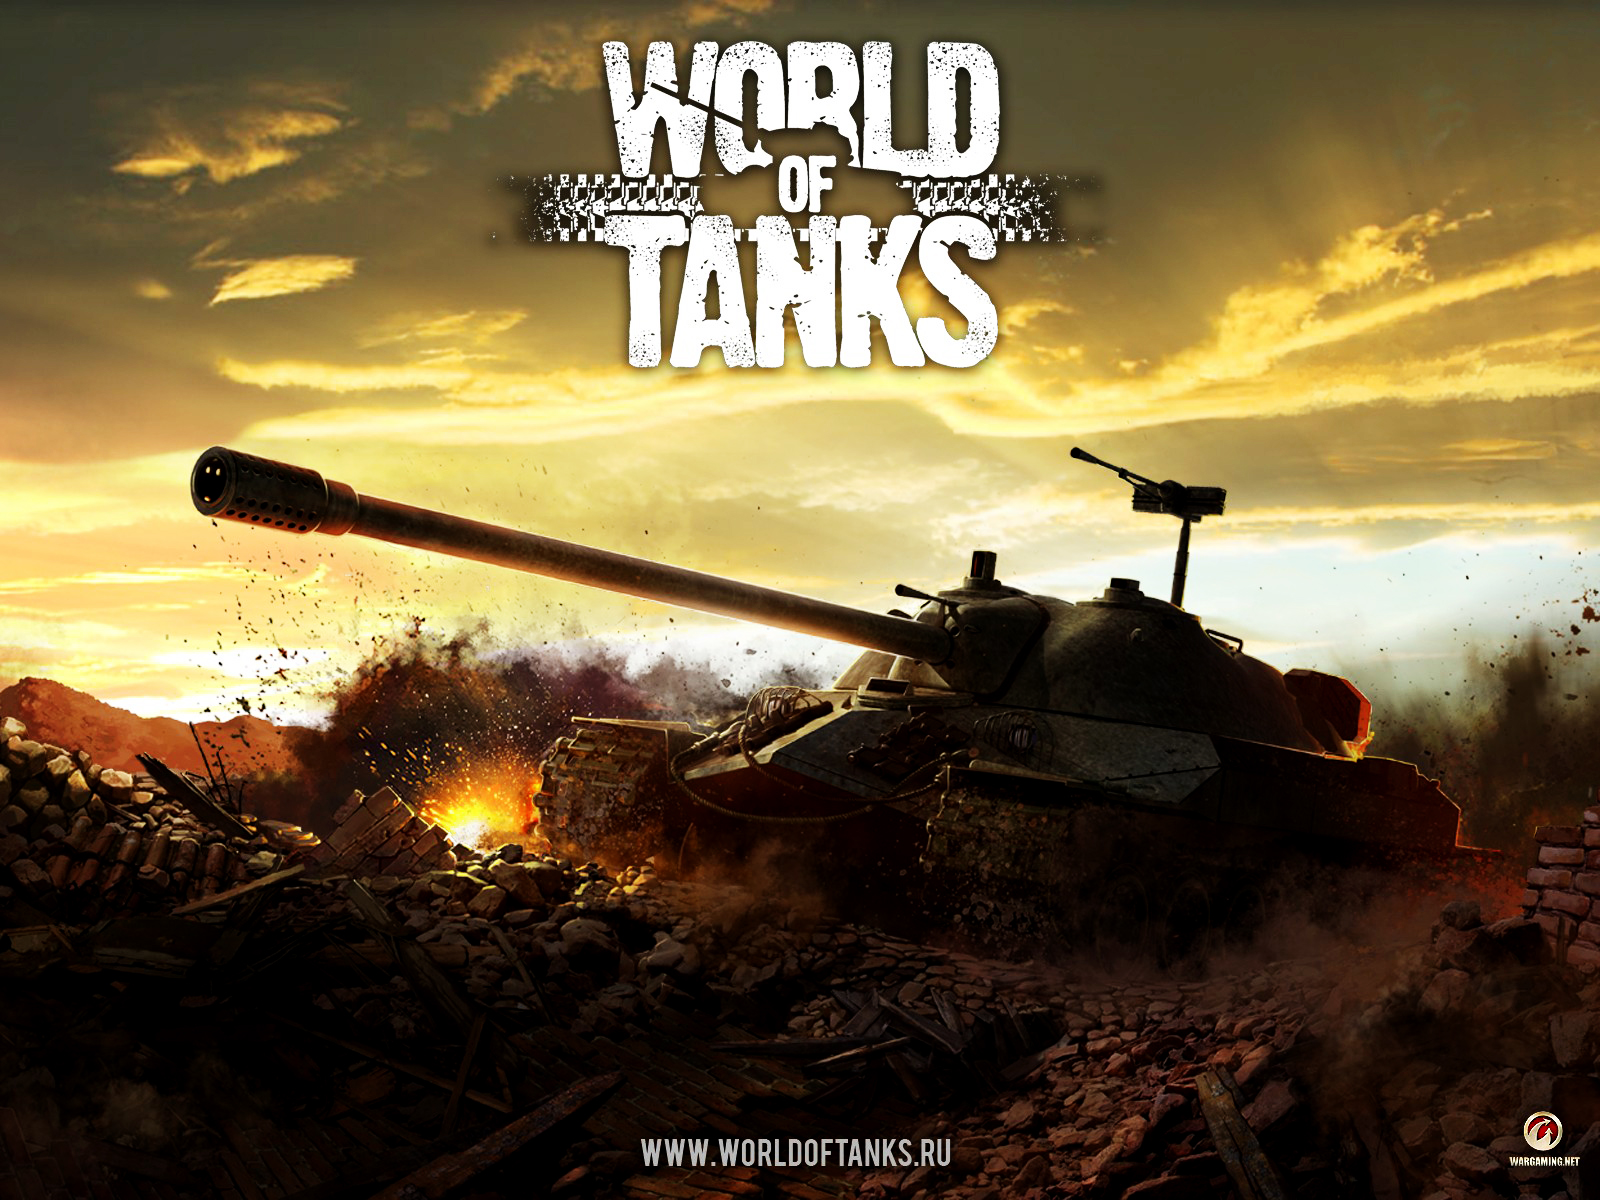 World of Tanks Online Game HD Wallpapers Download Free Wallpapers in